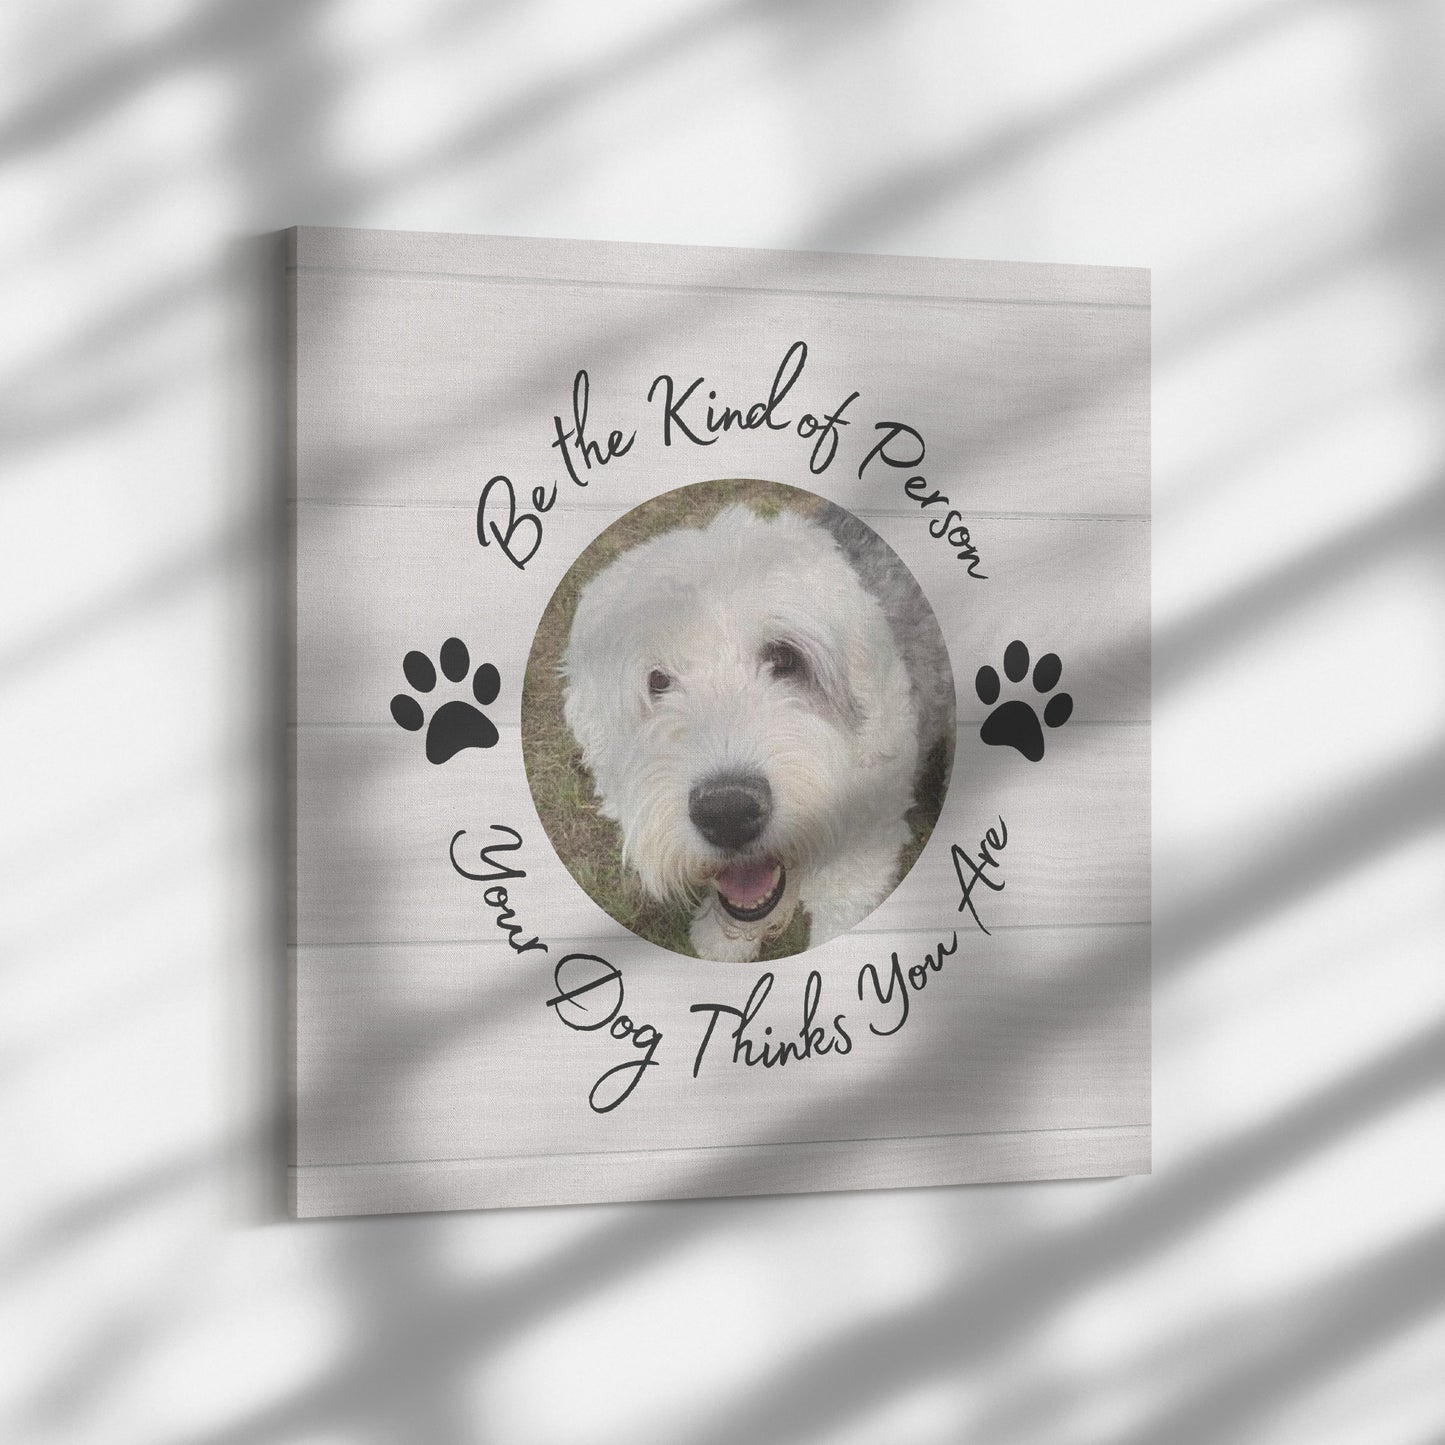 Personalized "Be the Kind of Person Your Dog Thinks You Are" Canvas Wall Art